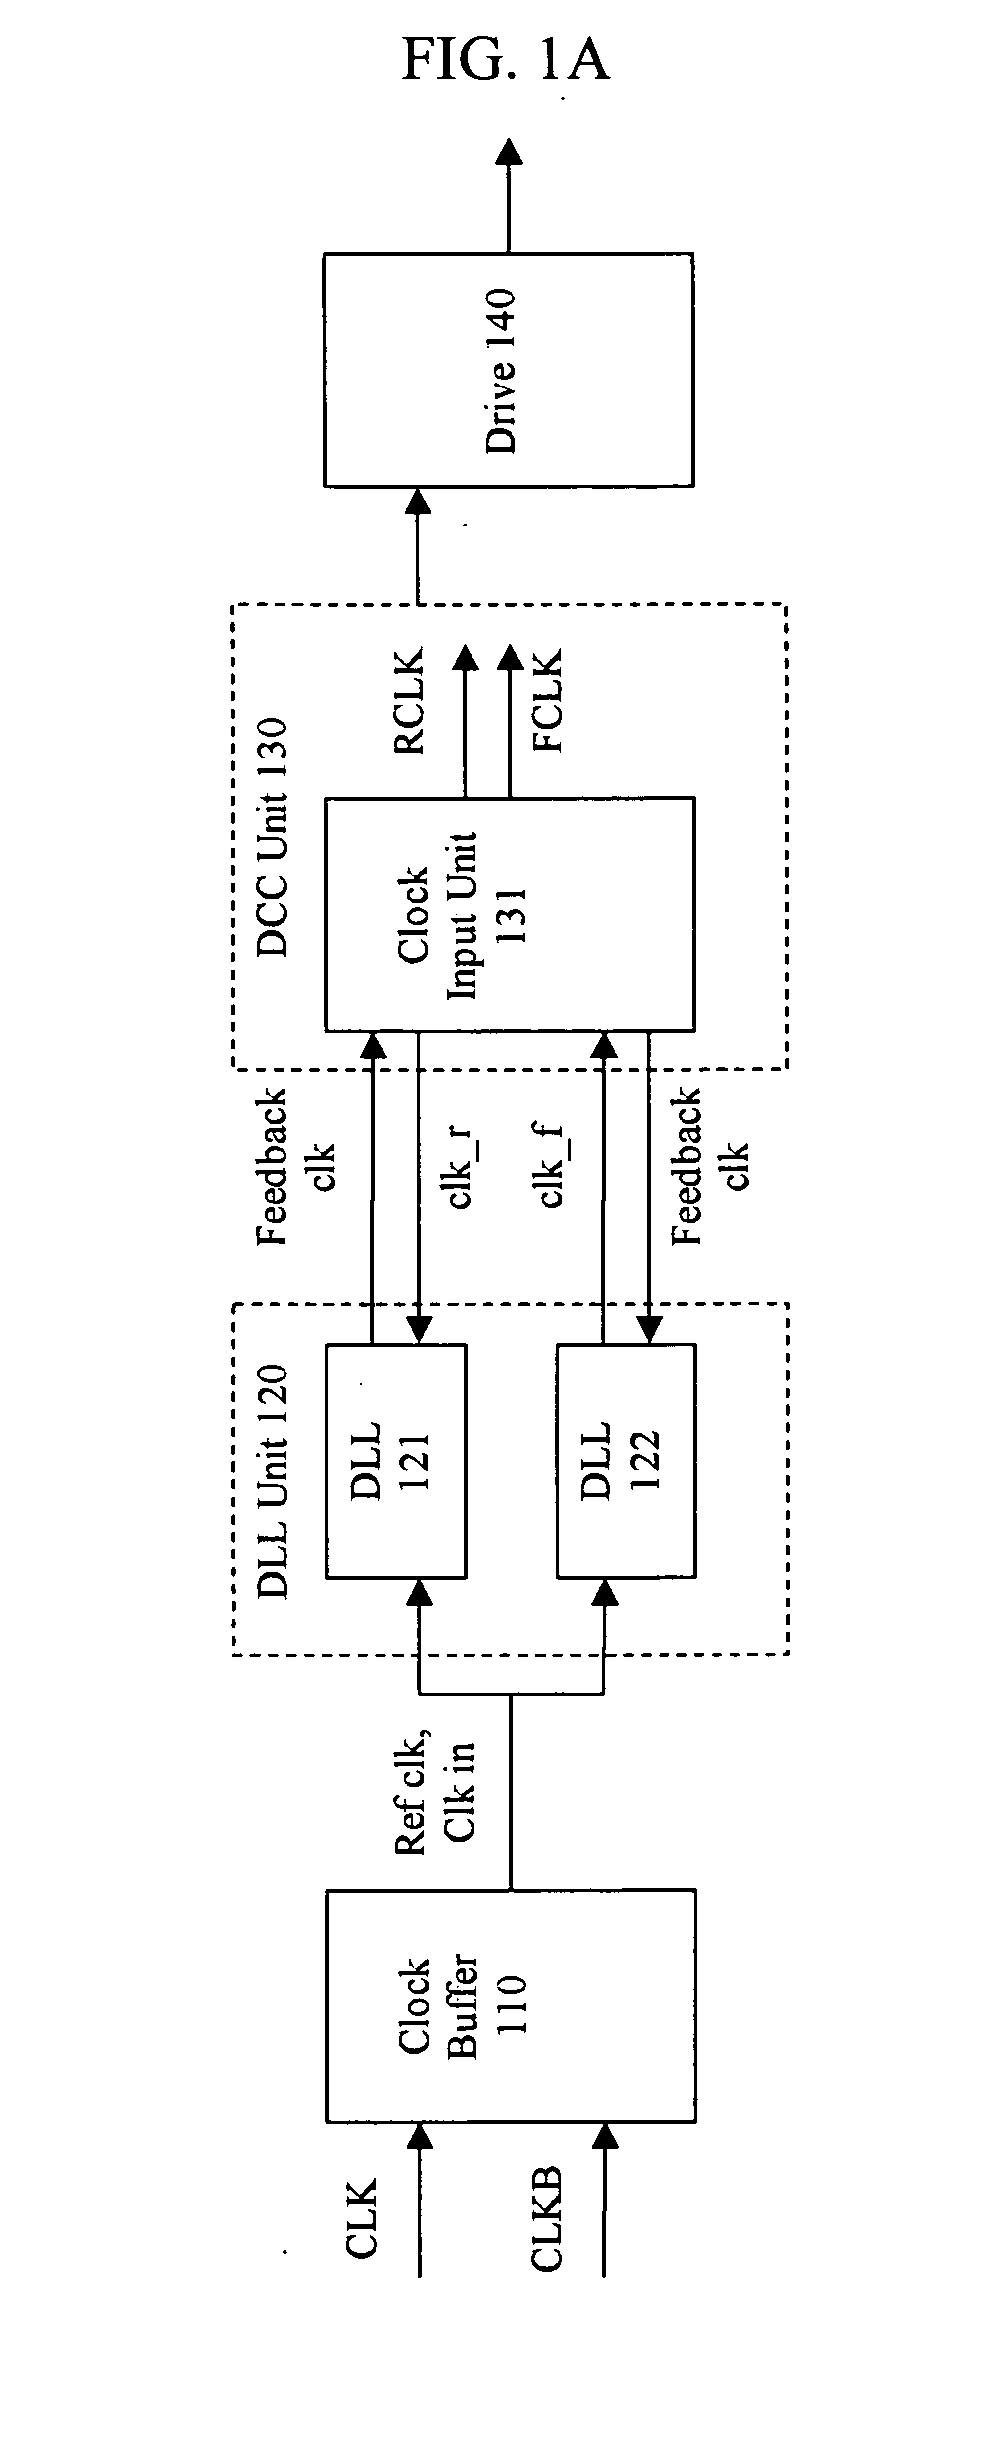 Duty cycle correction (DCC) circuit and delayed locked loop (DLL) circuit using the same